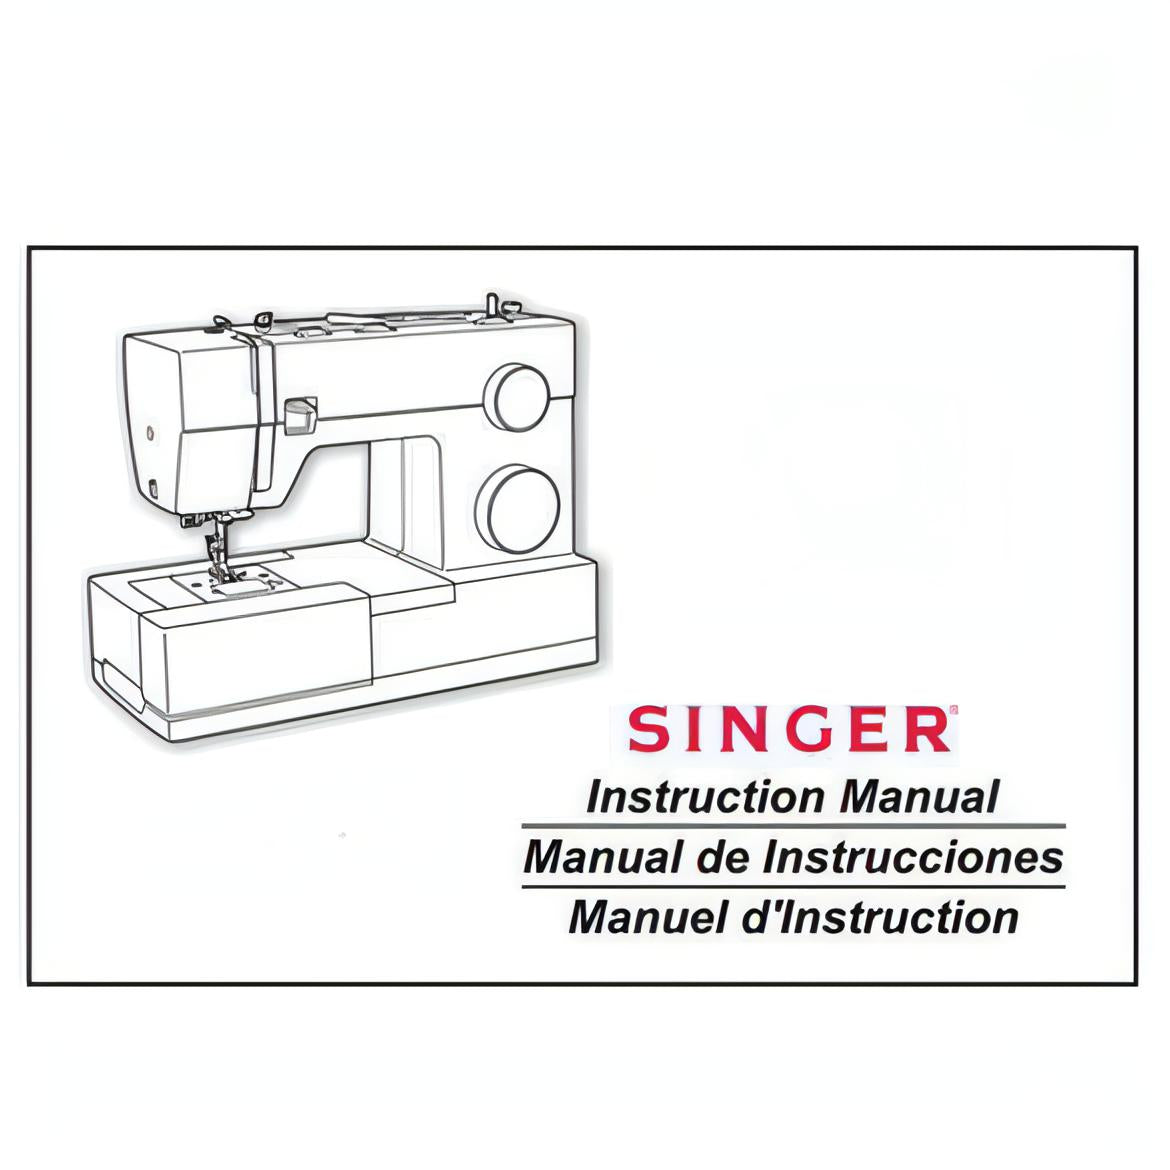 Instruction Manual for a Singer Sewing Machine (printed copy)